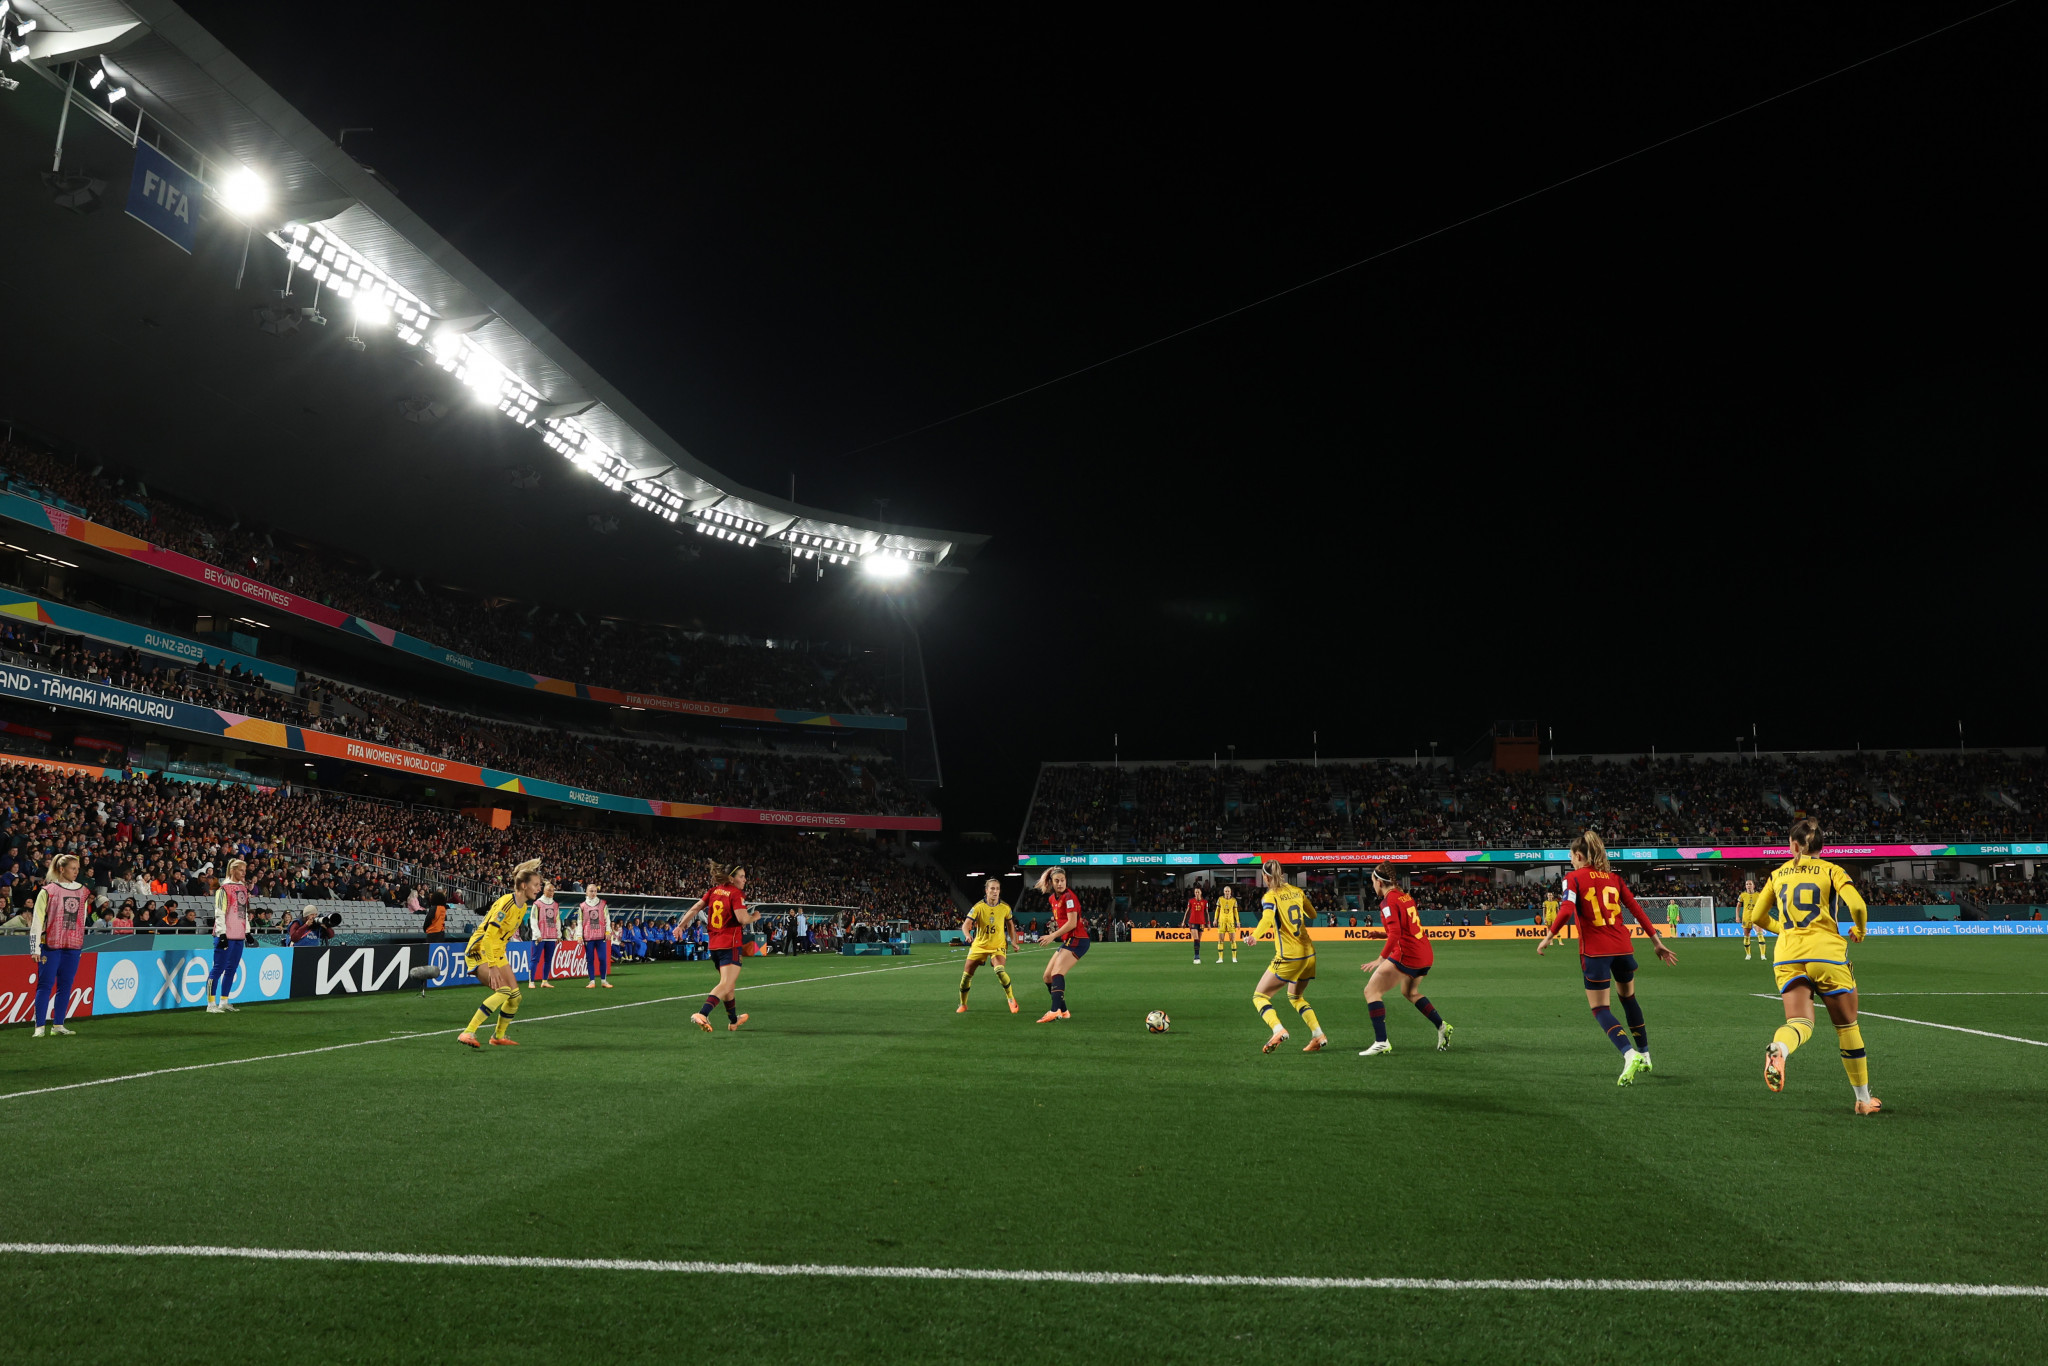 Spain and Sweden played a hard-fought 80 minutes before the goals flowed in the final ten minutes as Spain won 2-1 ©Getty Images 